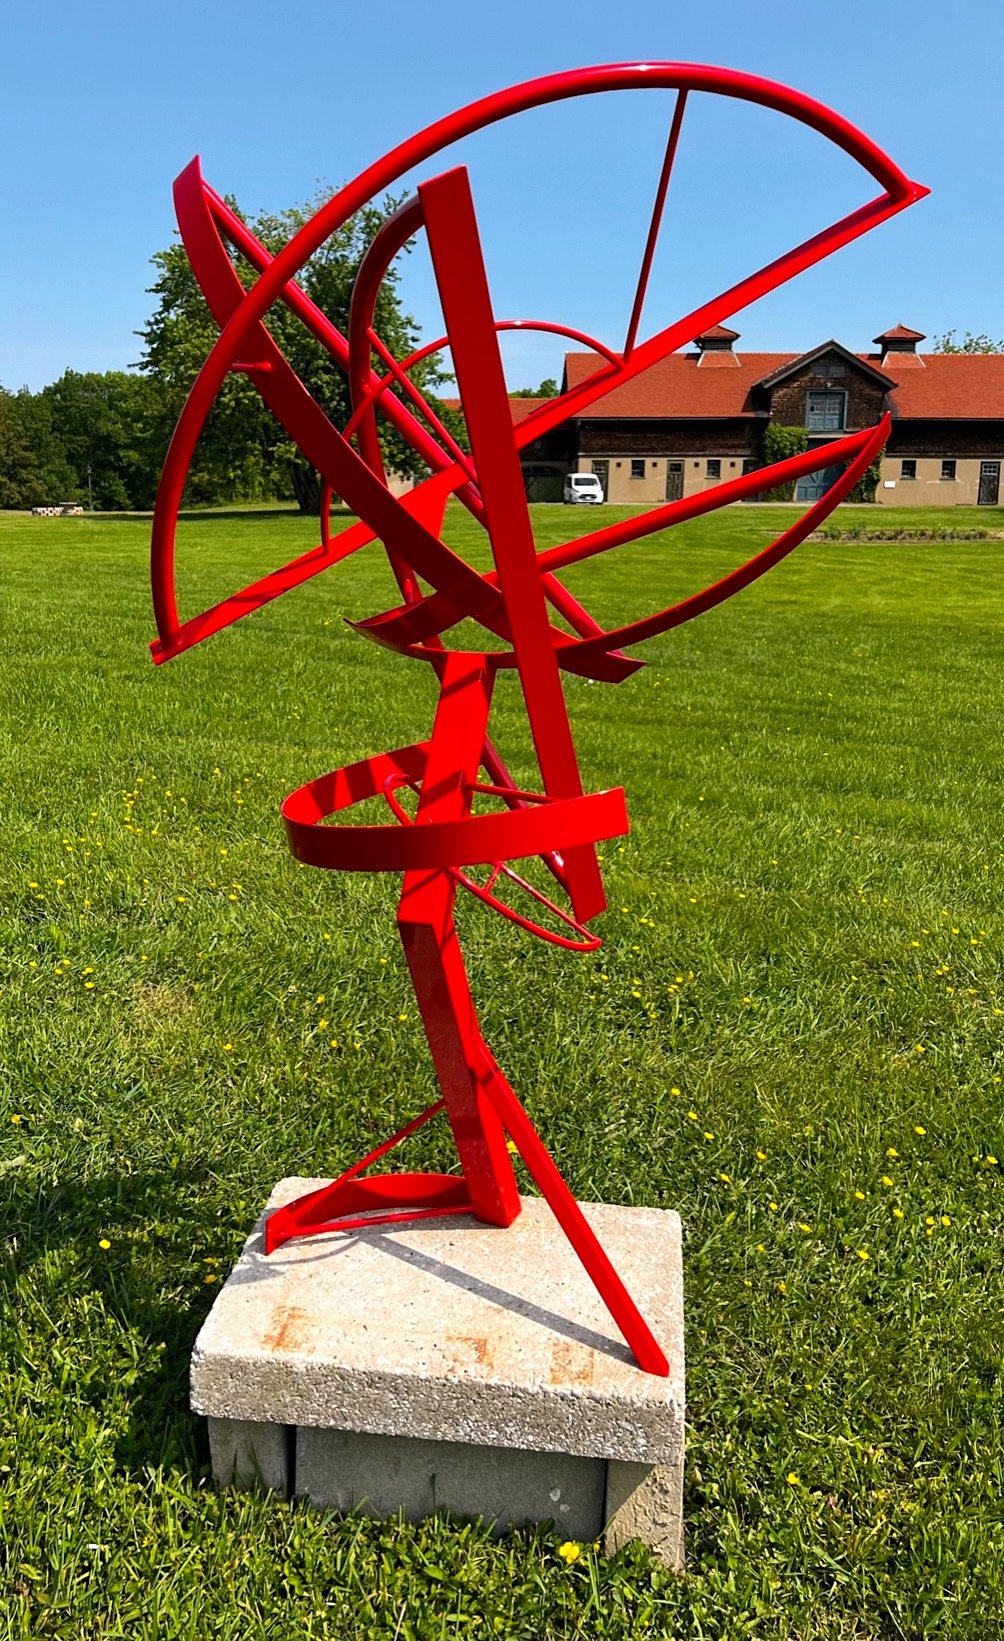 The Inability of the Radius to Know the Circumference, 2012, powder-coated steel, 59” x 38” x 23”